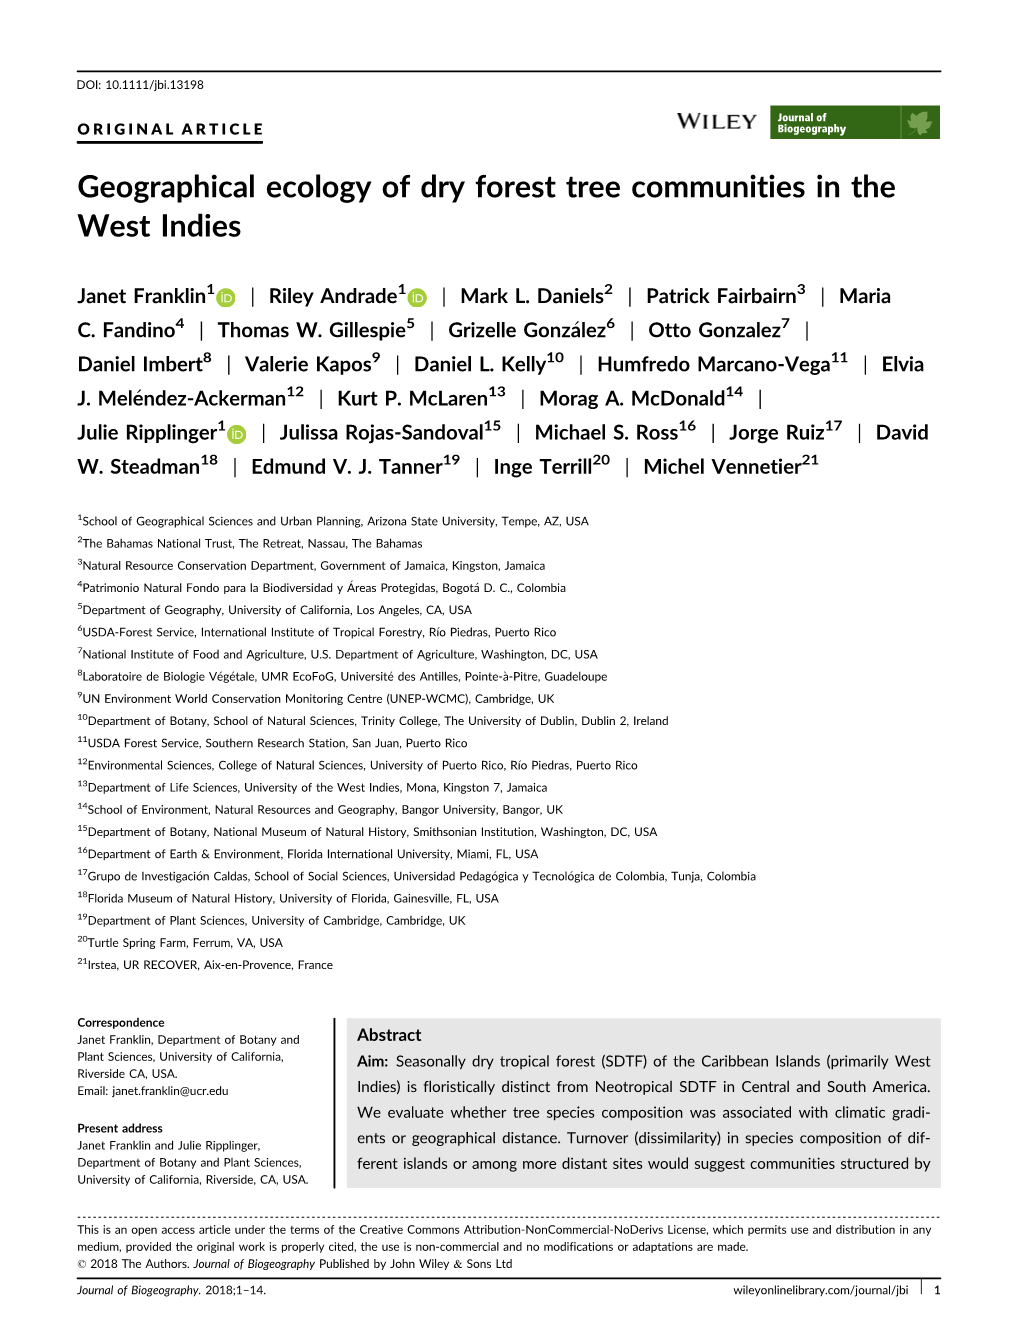 Geographical Ecology of Dry Forest Tree Communities in the West Indies